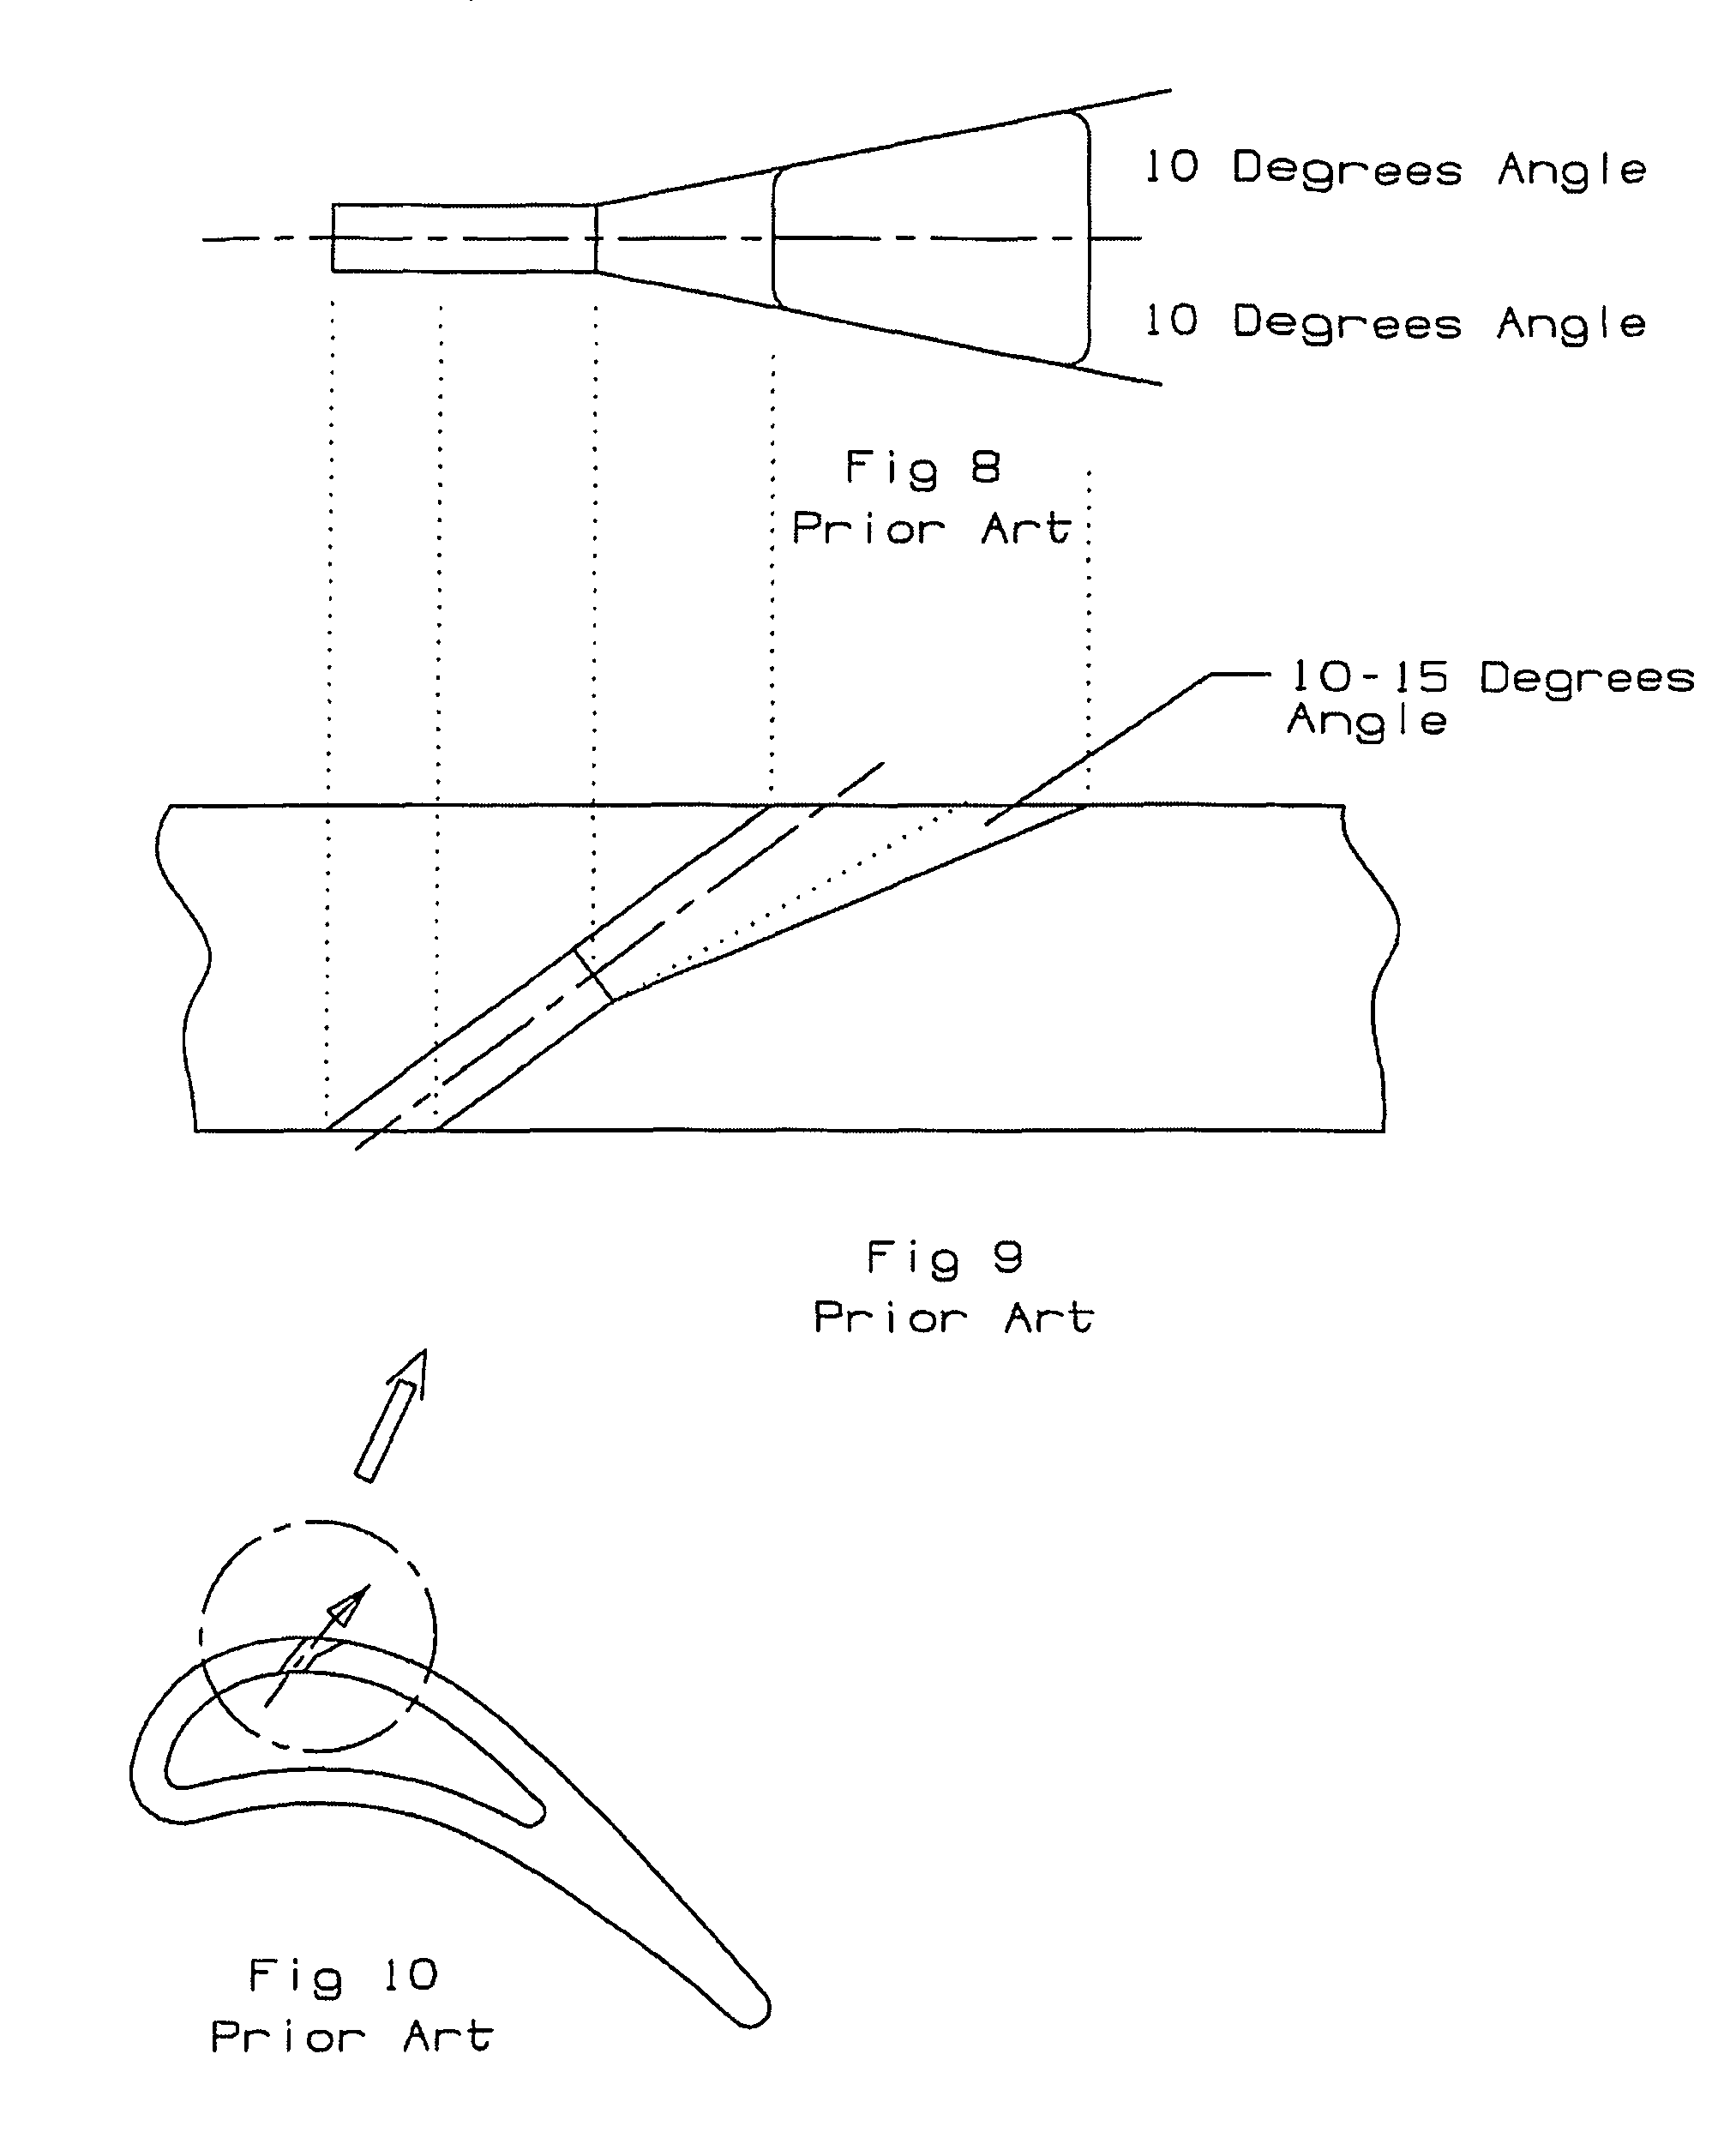 Film cooling hole for turbine airfoil